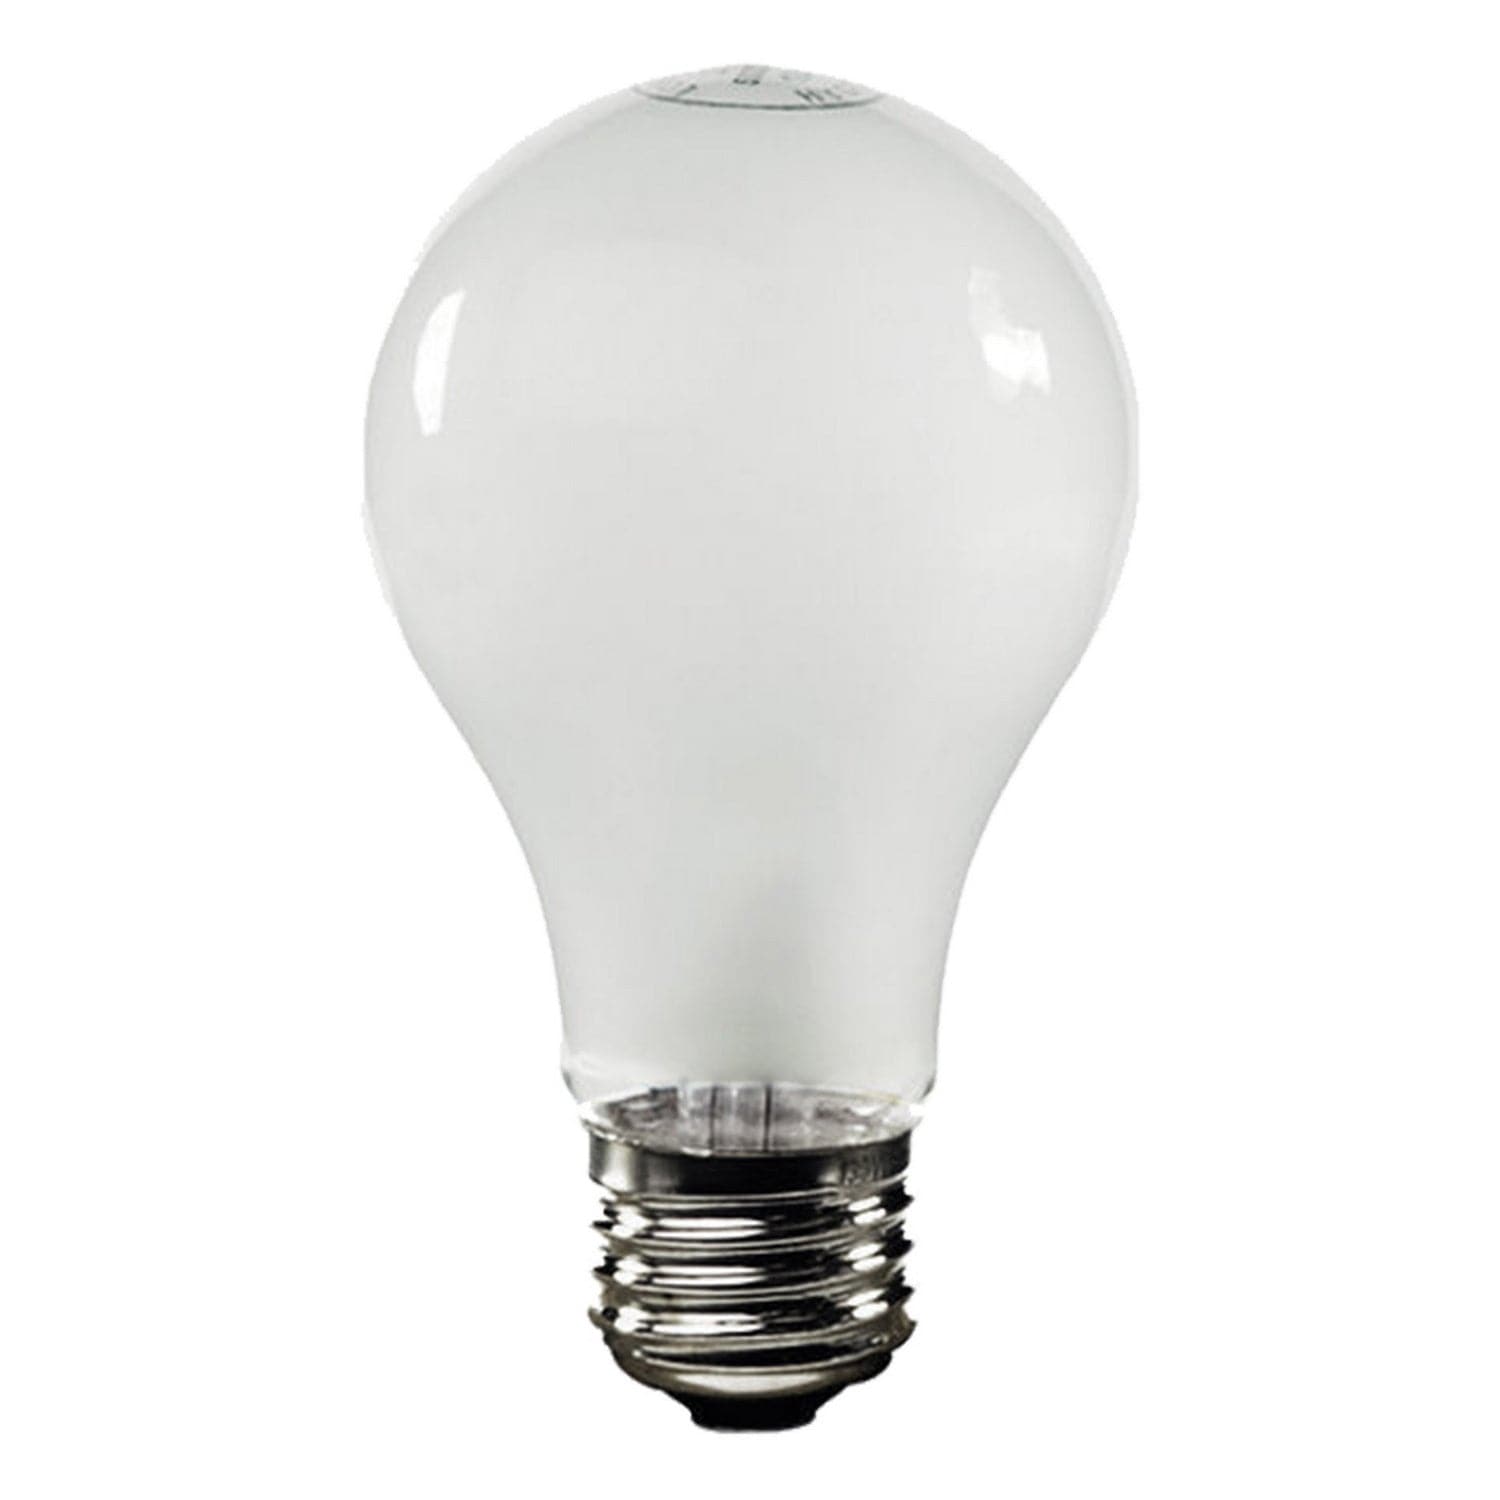 Renwil - LB013-3 - Light Bulb - Galley - Etched Glass